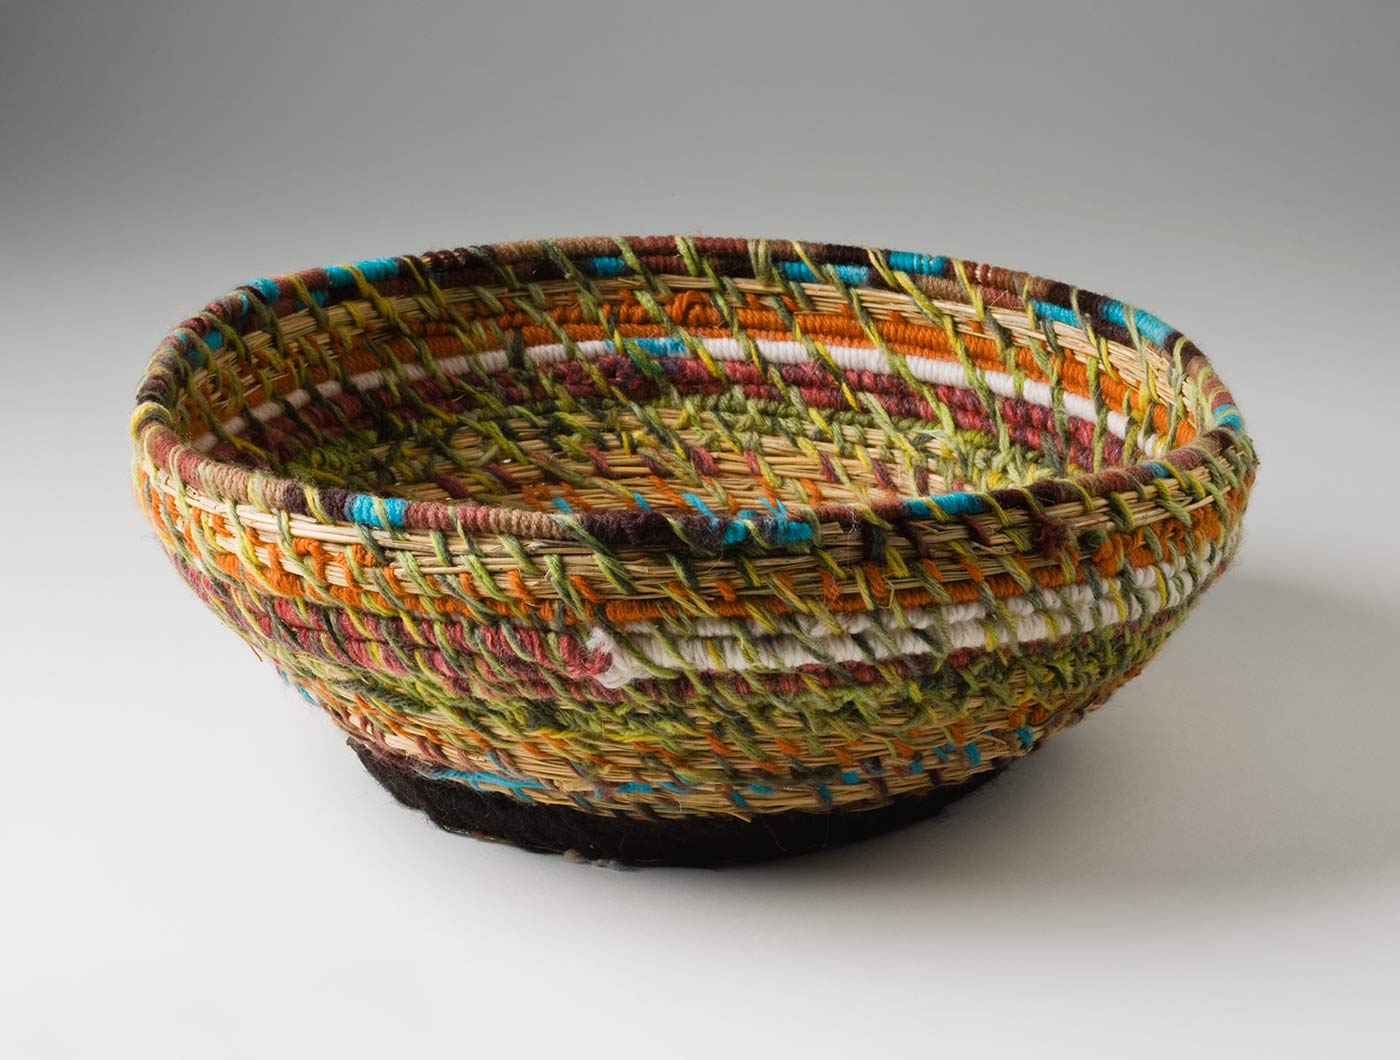 A circular coiled yarn and plant fibre basket with a flat metal base. The base is made of a blue 'Fray Bento / Steak and Kidney Pie' tin lid which has been attached to the yarn section with black yarn through holes punched in the metal. The coiled yarn in muted tones of green, orange, yellow,pink, turquoise, white and orange, is spaced out so the plant fibre centre can be seen. - click to view larger image